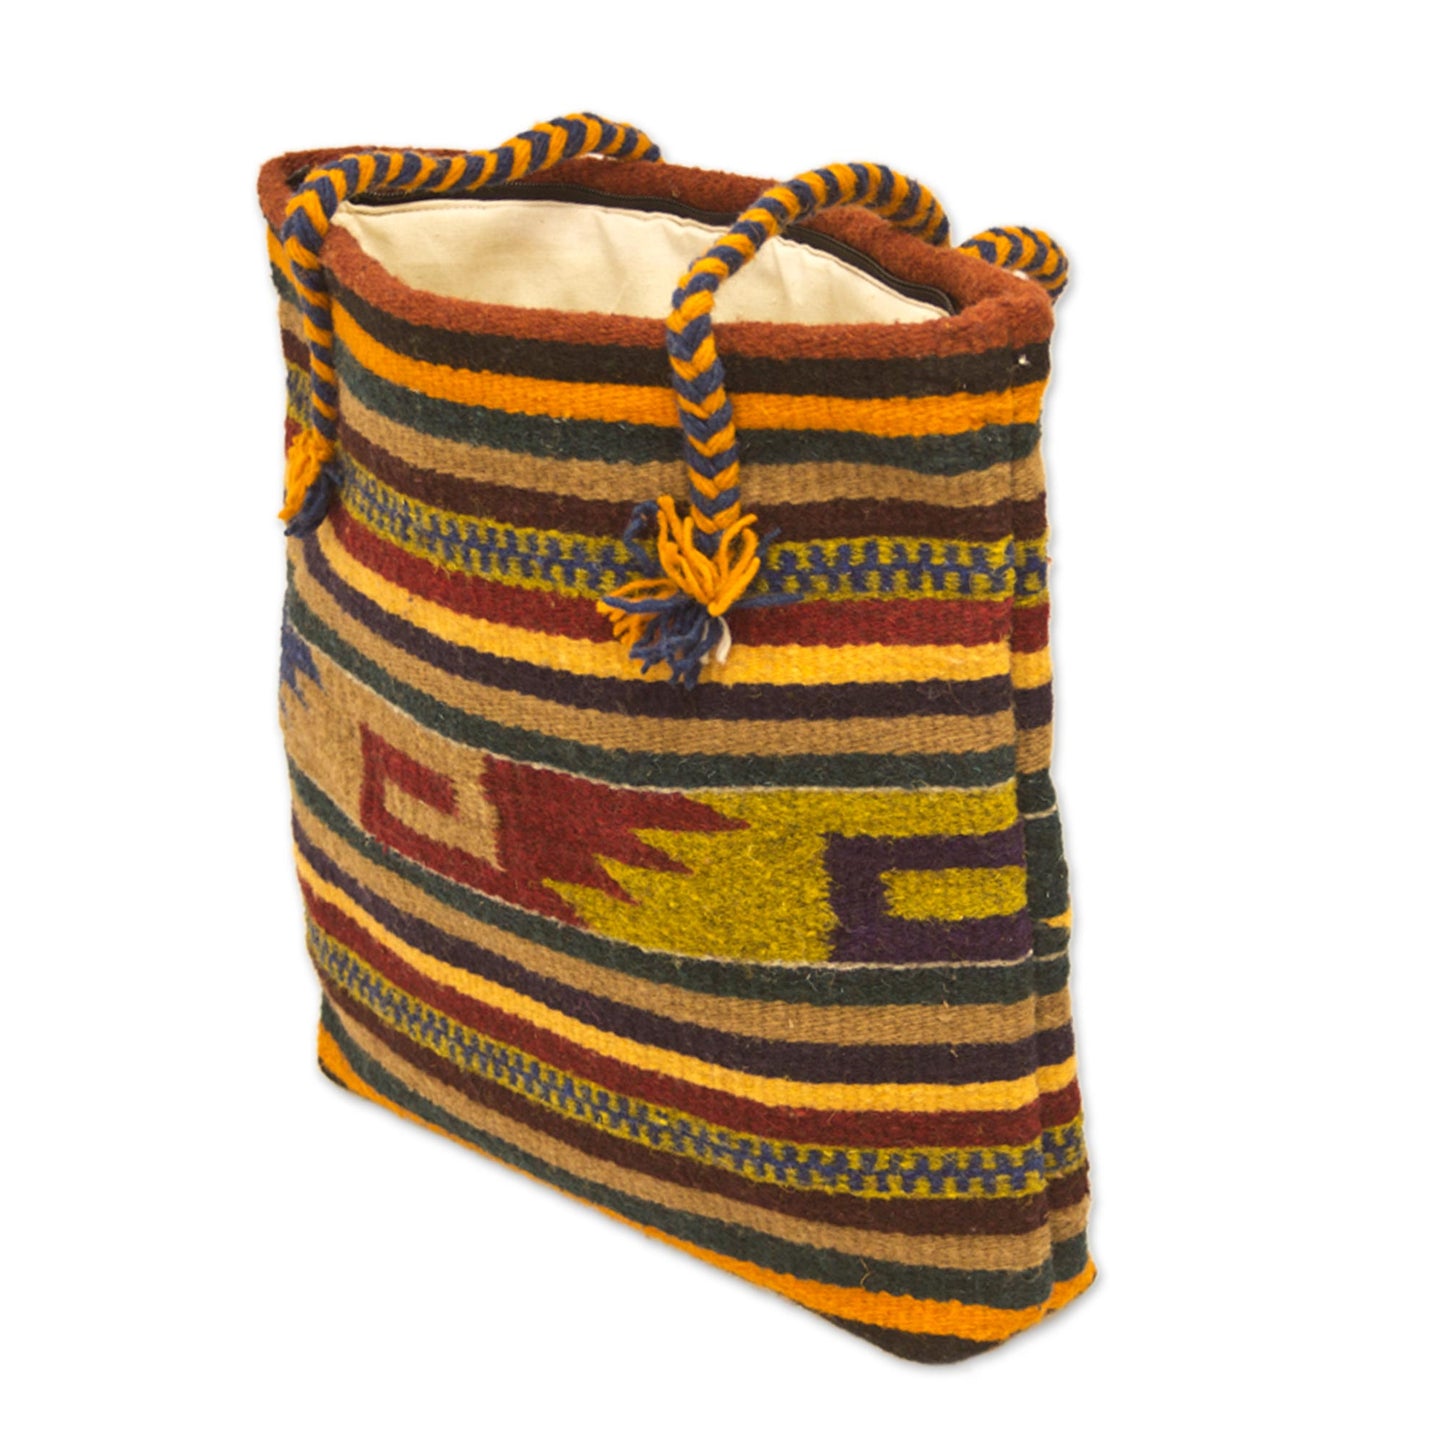 Zapotec Twilight Geometric Wool Shoulder Bag Hand Woven in Mexico